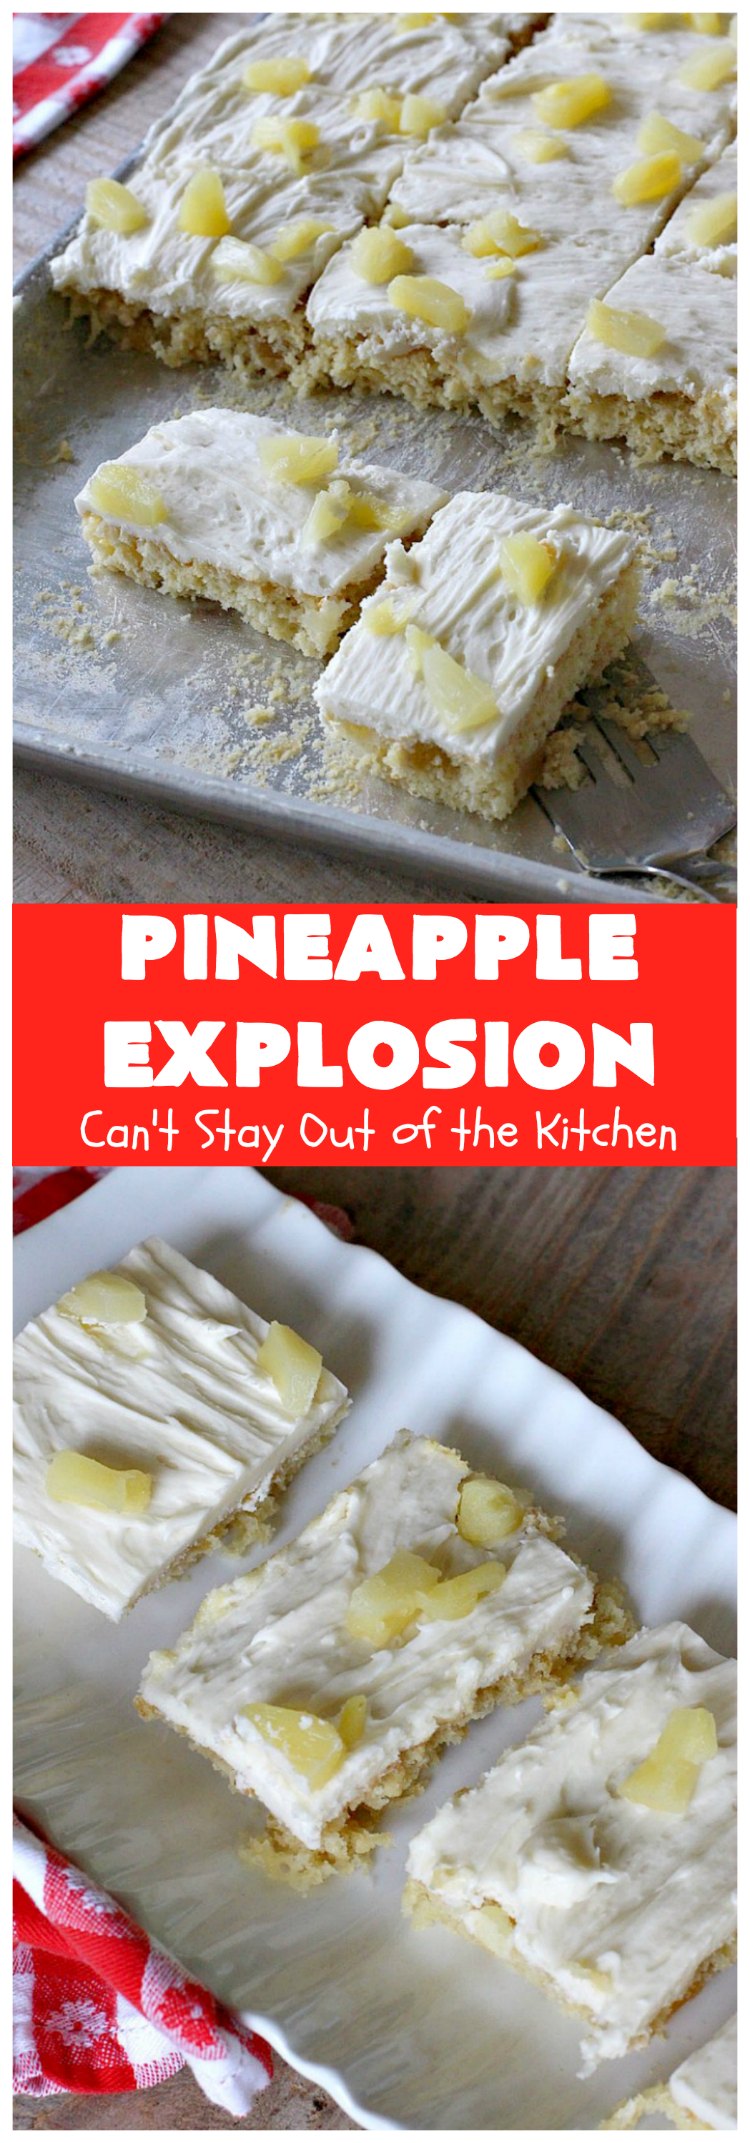 Pineapple Explosion | Can't Stay Out of the Kitchen